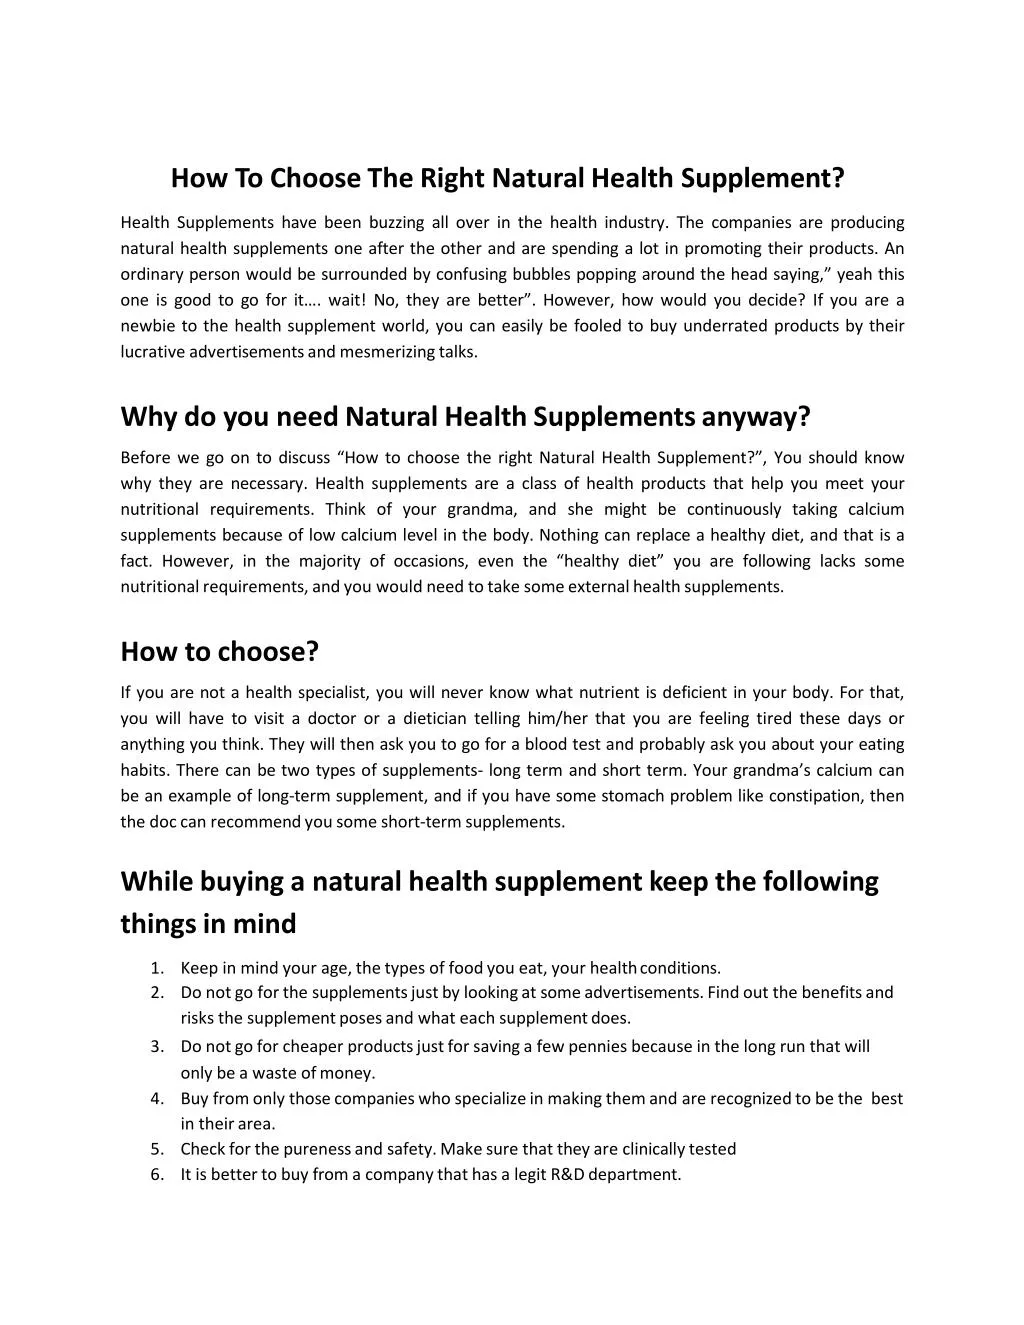 how to choose the right natural health supplement n.